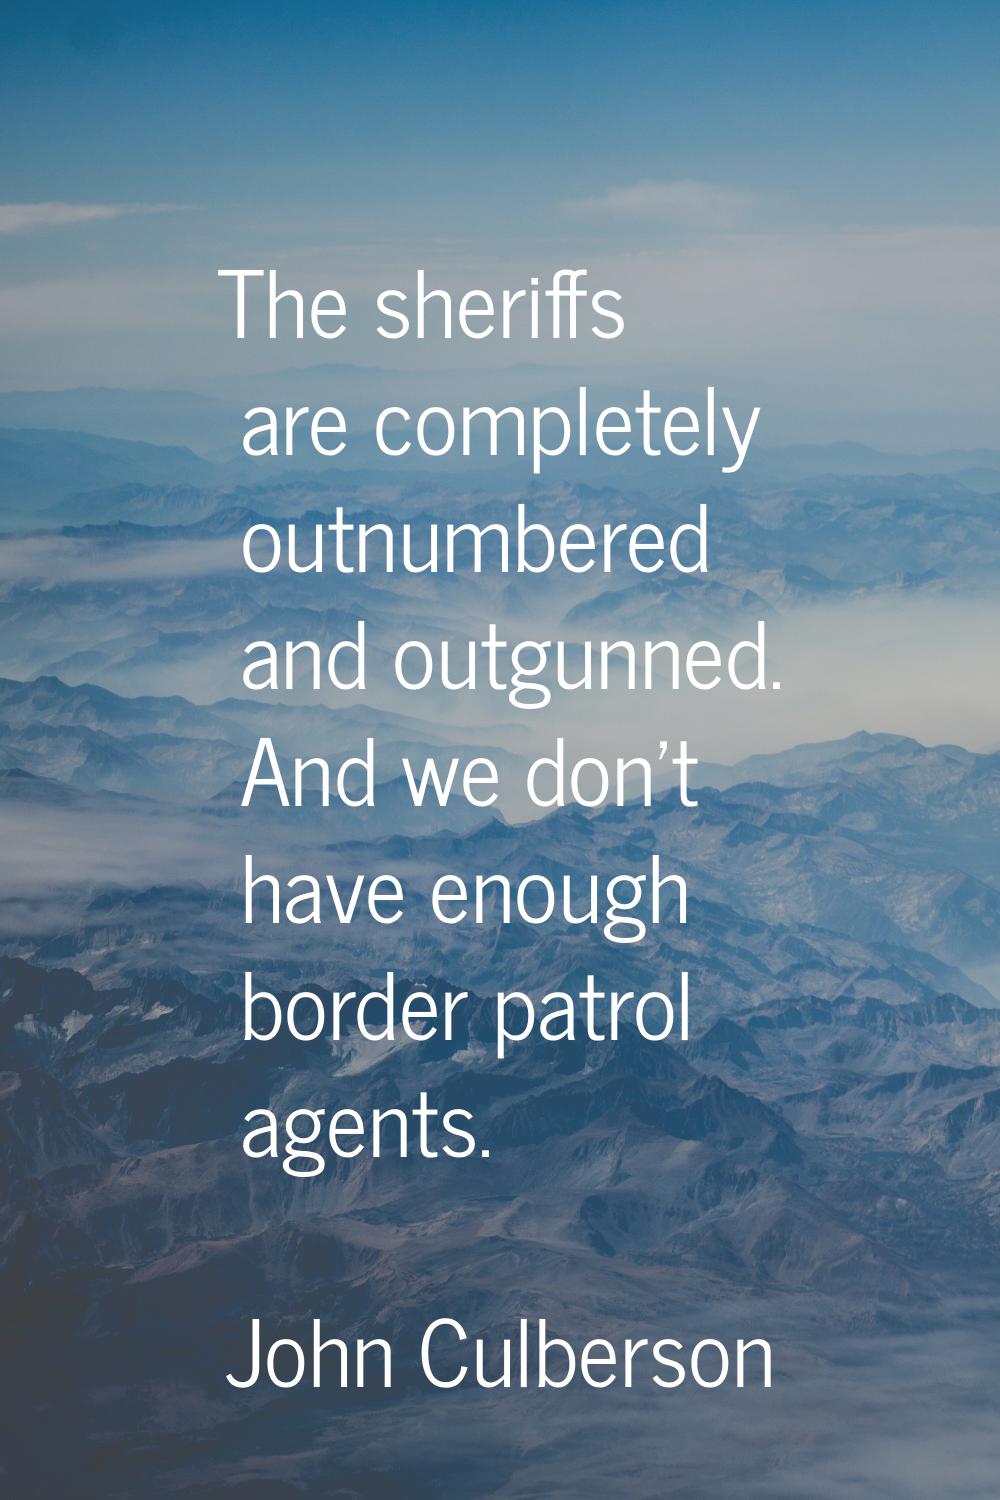 The sheriffs are completely outnumbered and outgunned. And we don't have enough border patrol agent